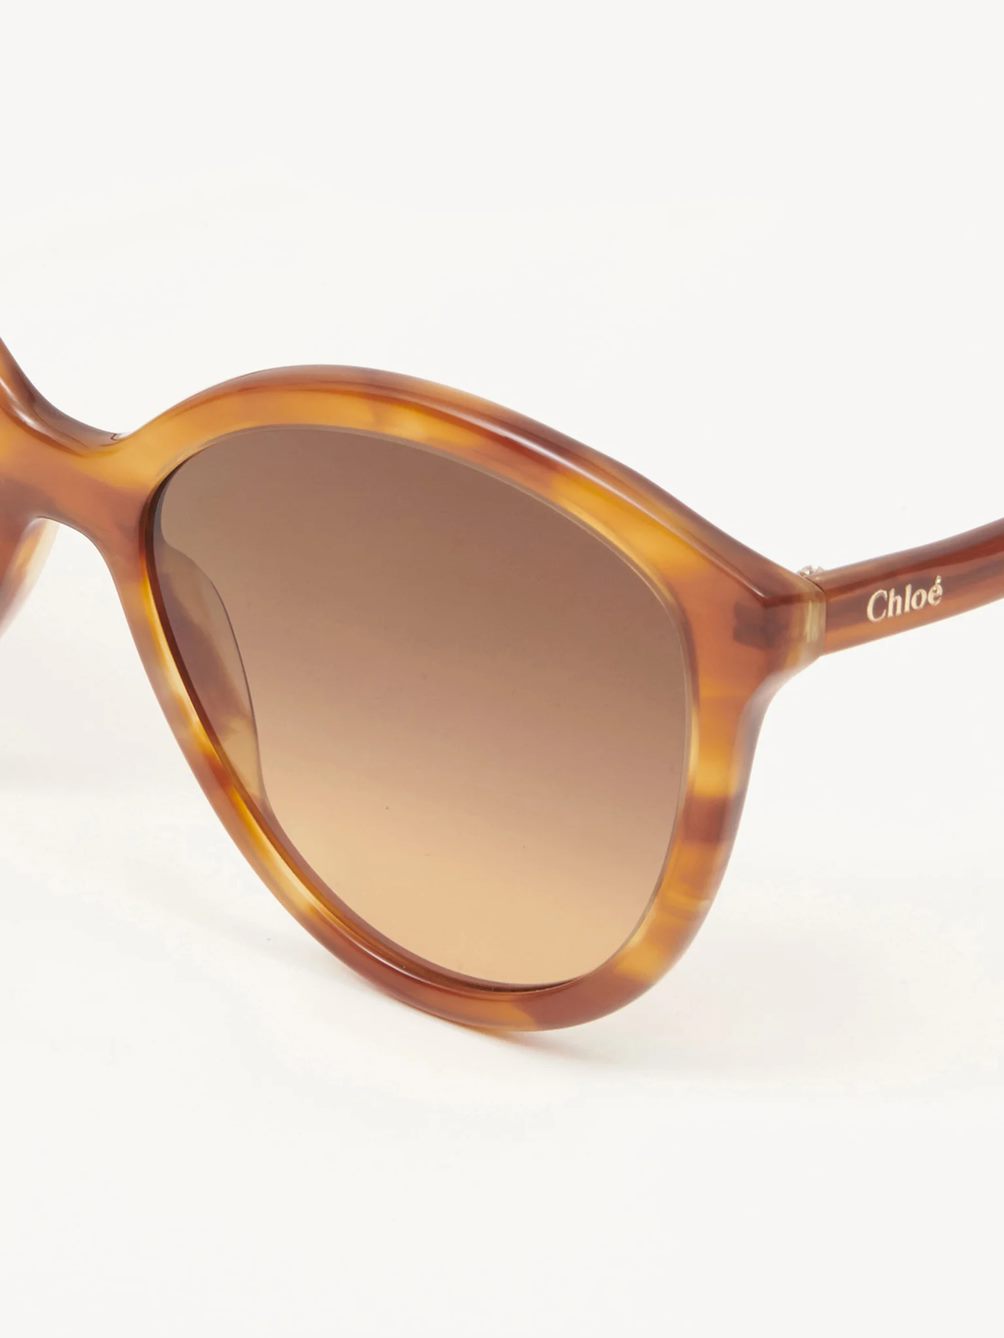 A close up of brown tortoise coloured sunglasses with a brown to cream ombre lens.